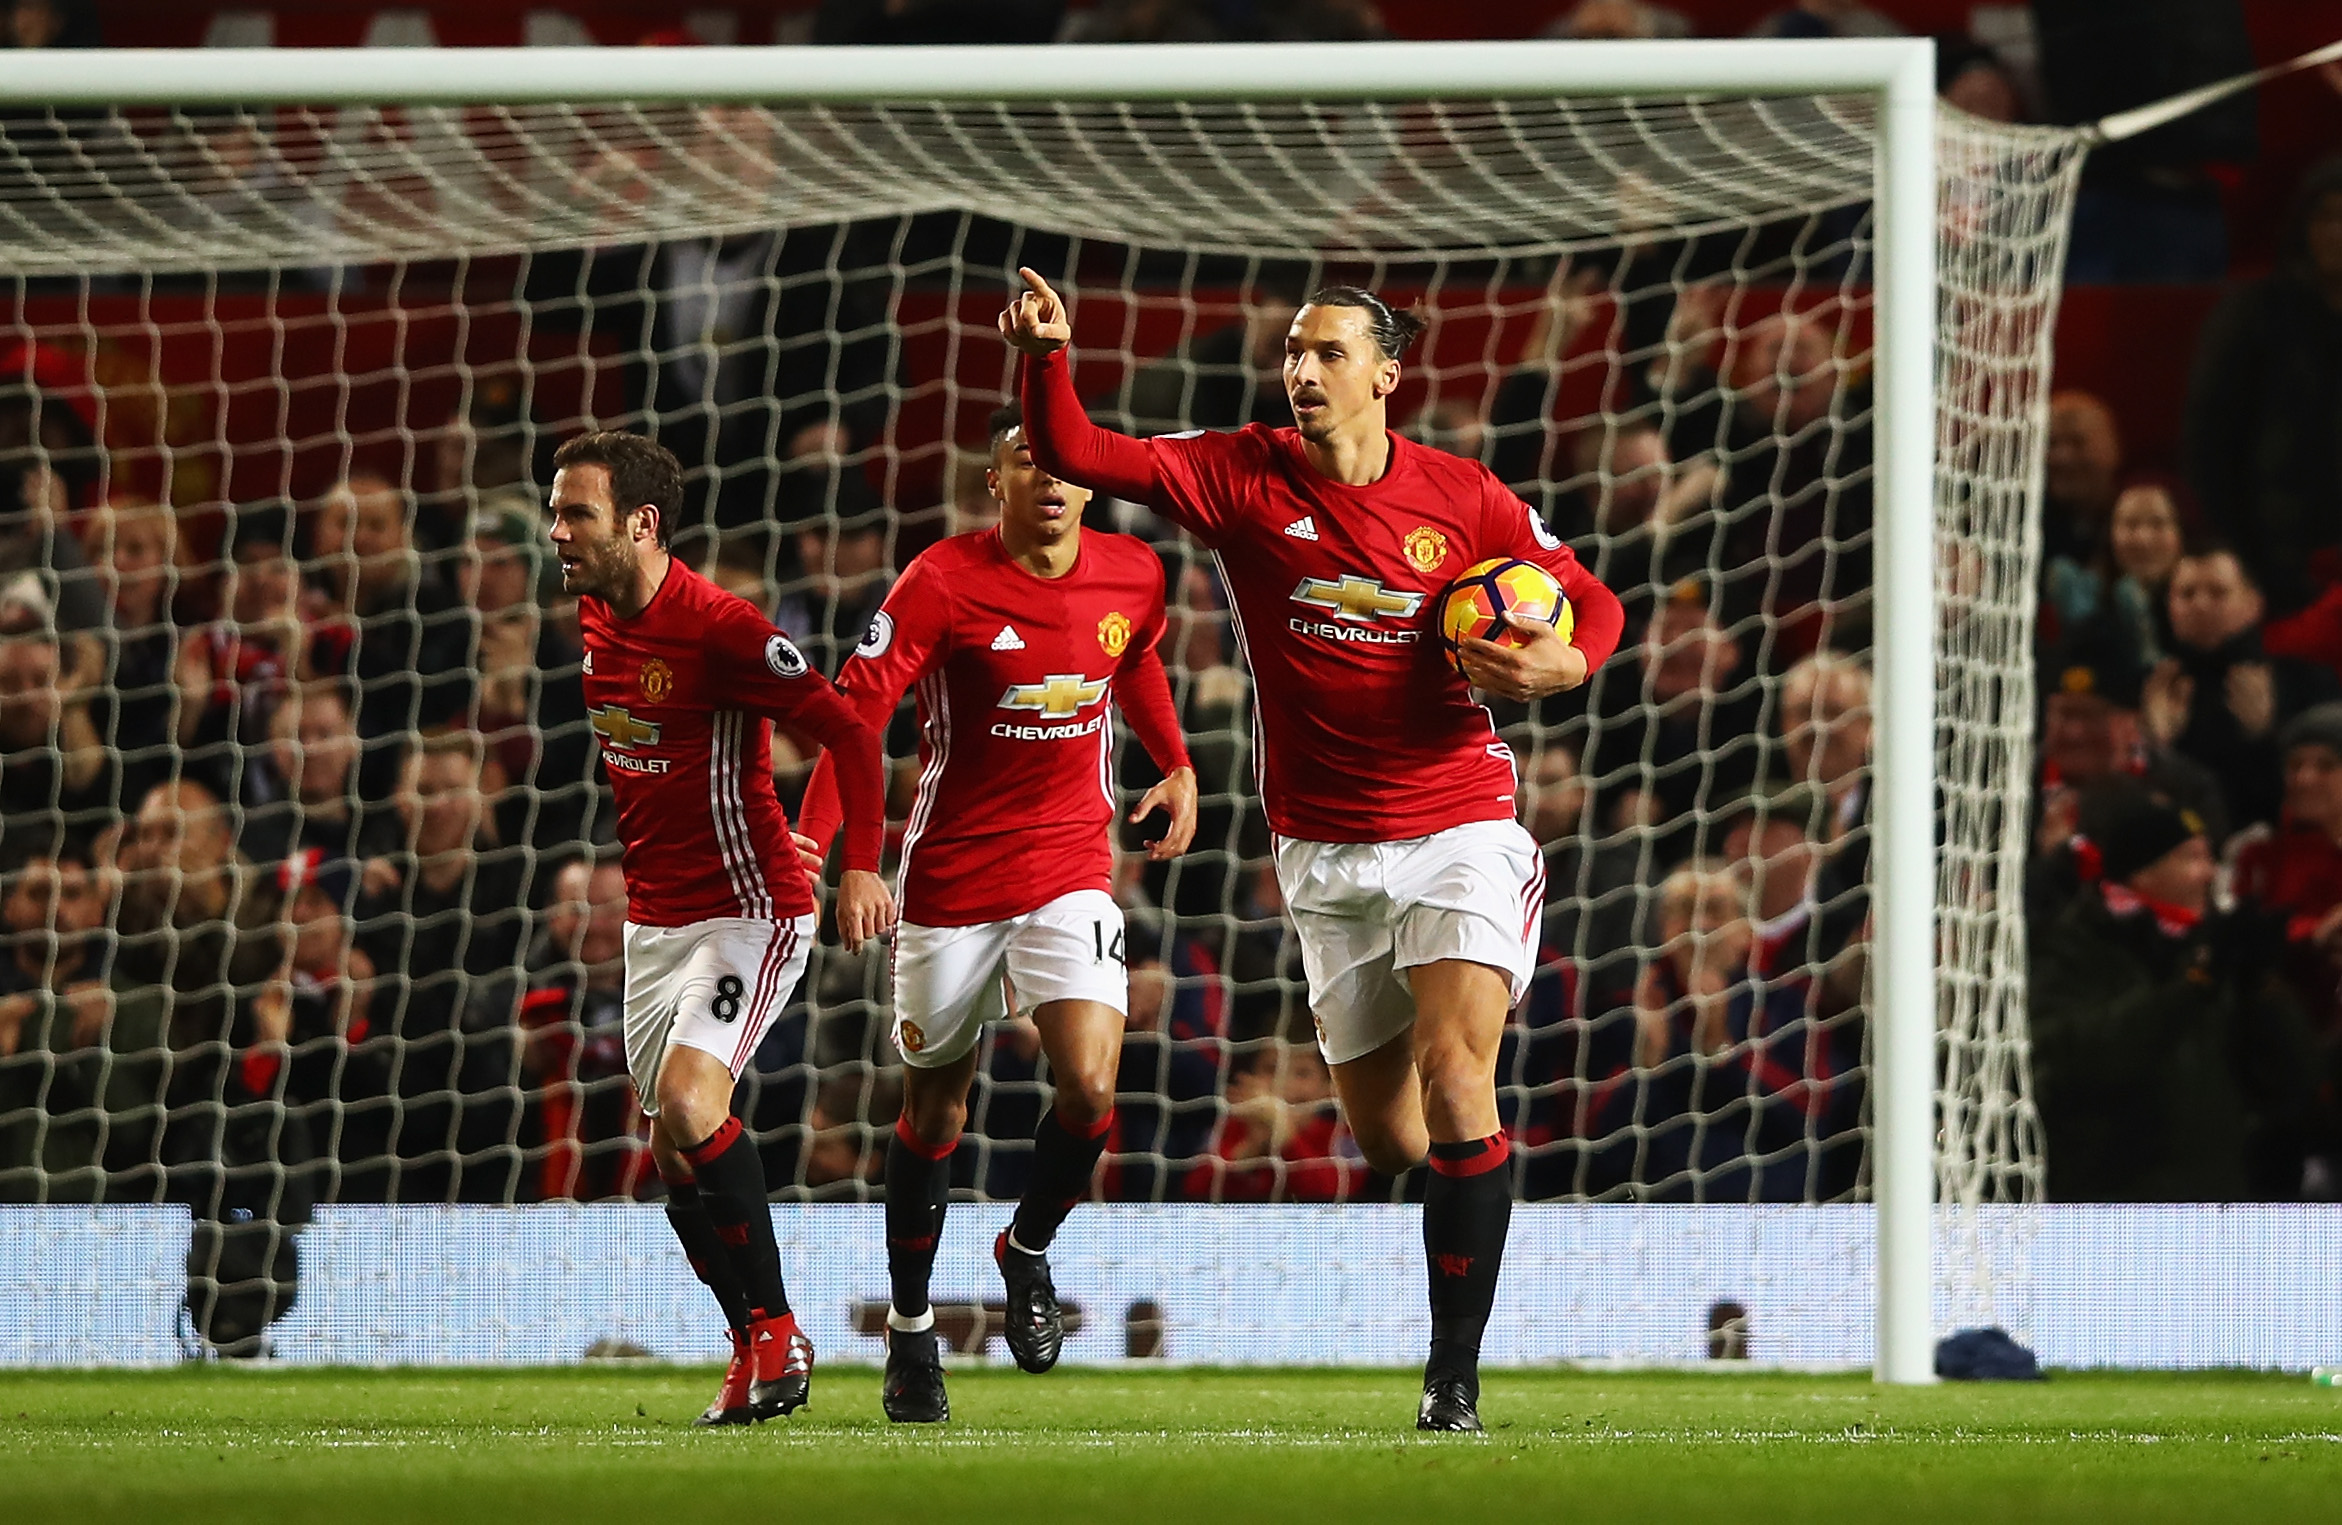 MANCHESTER, ENGLAND - NOVEMBER 27: Zlatan Ibrahimovic of Manchester United celebrates scoring his sides first goal during the Premier League match between Manchester United and West Ham United at Old Trafford on November 27, 2016 in Manchester, England.  (Photo by Clive Brunskill/Getty Images)